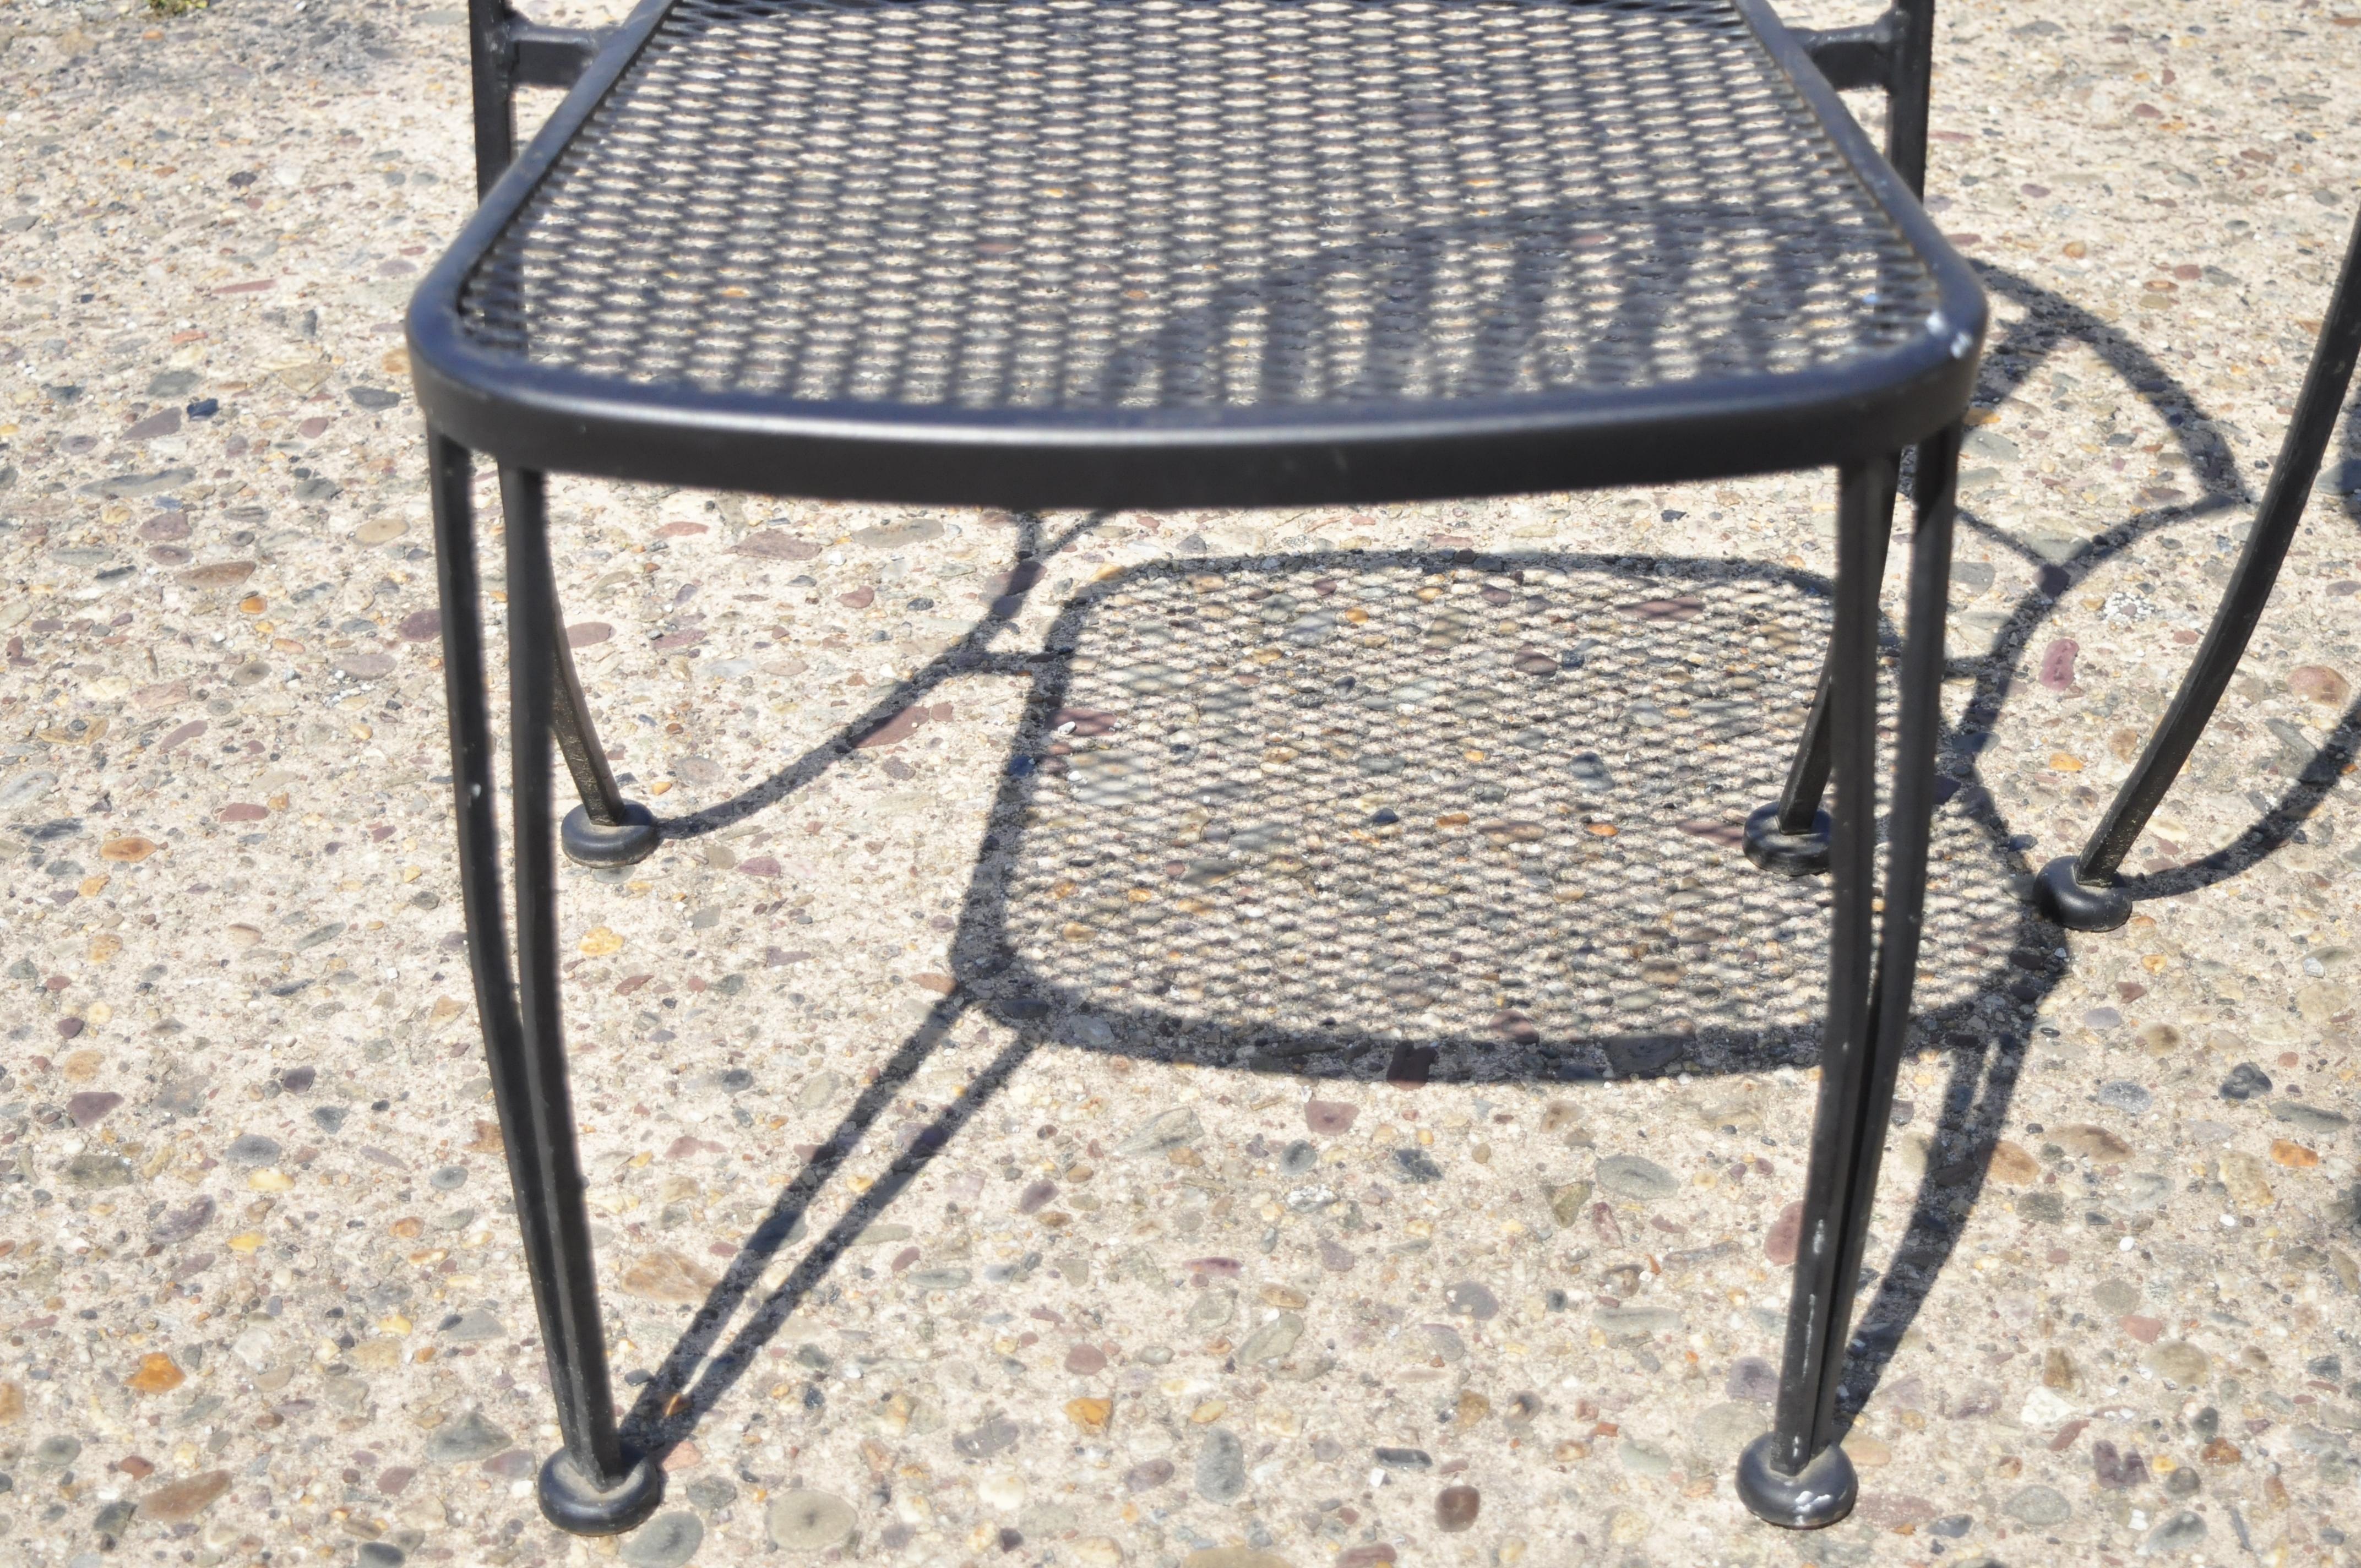 20th Century Modern Wrought Iron Barrel Back Sculptural Garden Patio Dining Chairs, Set of 4 For Sale